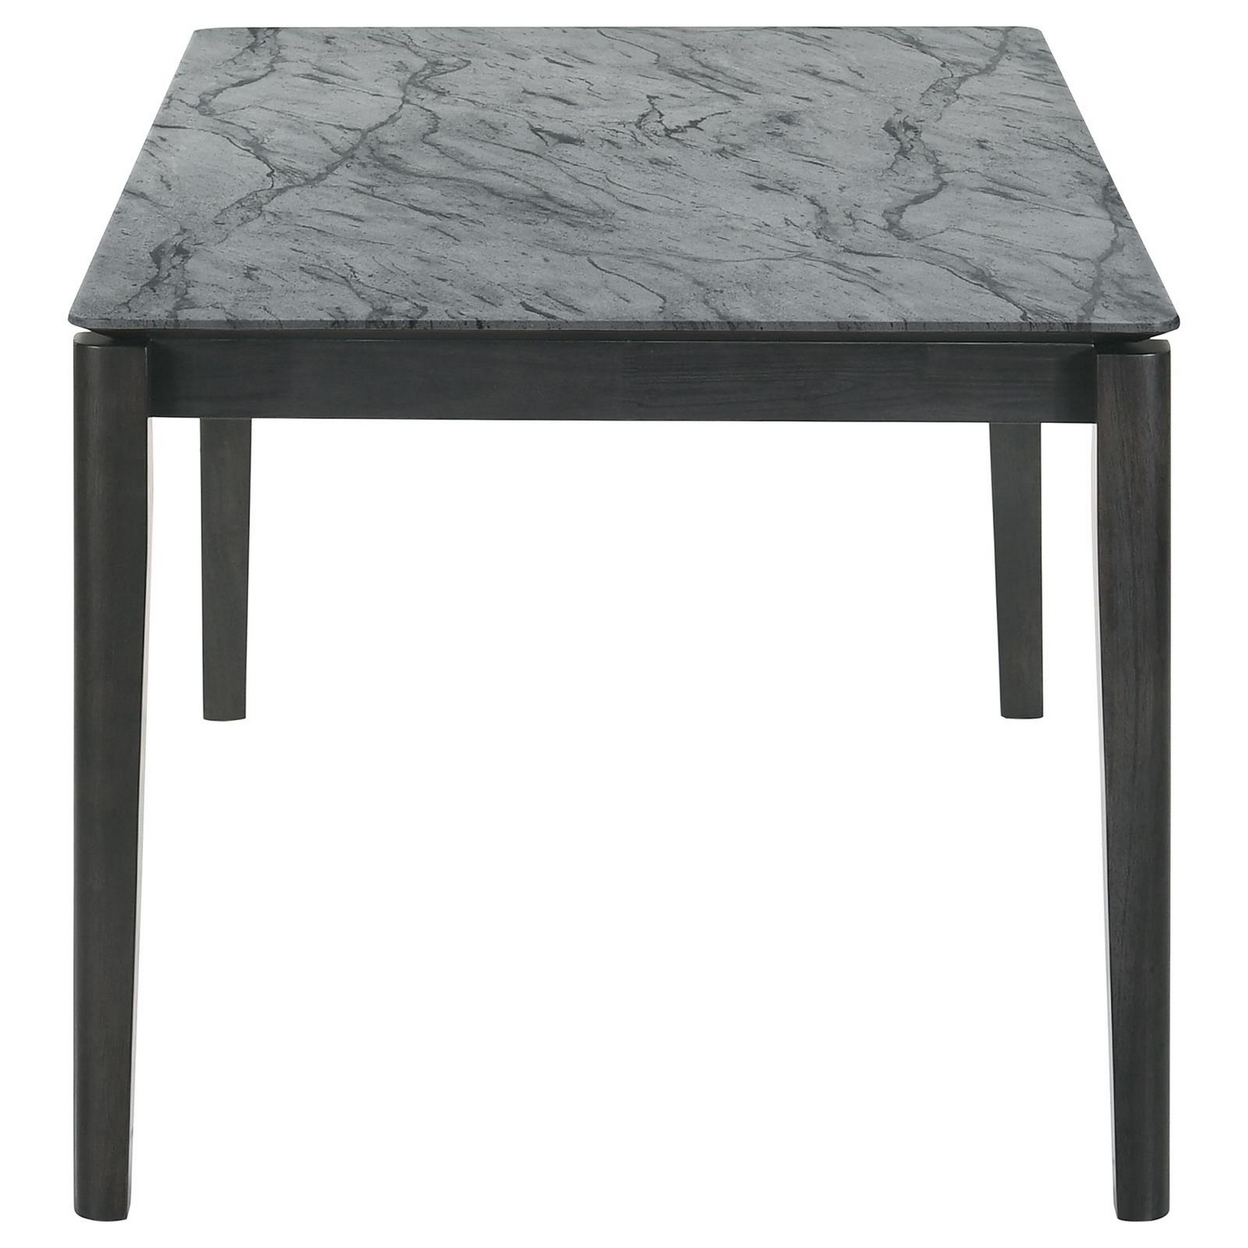 Abi 63 Inch Dining Table, Beveled Top, Faux Marble Finish, Charcoal -Saltoro Sherpi